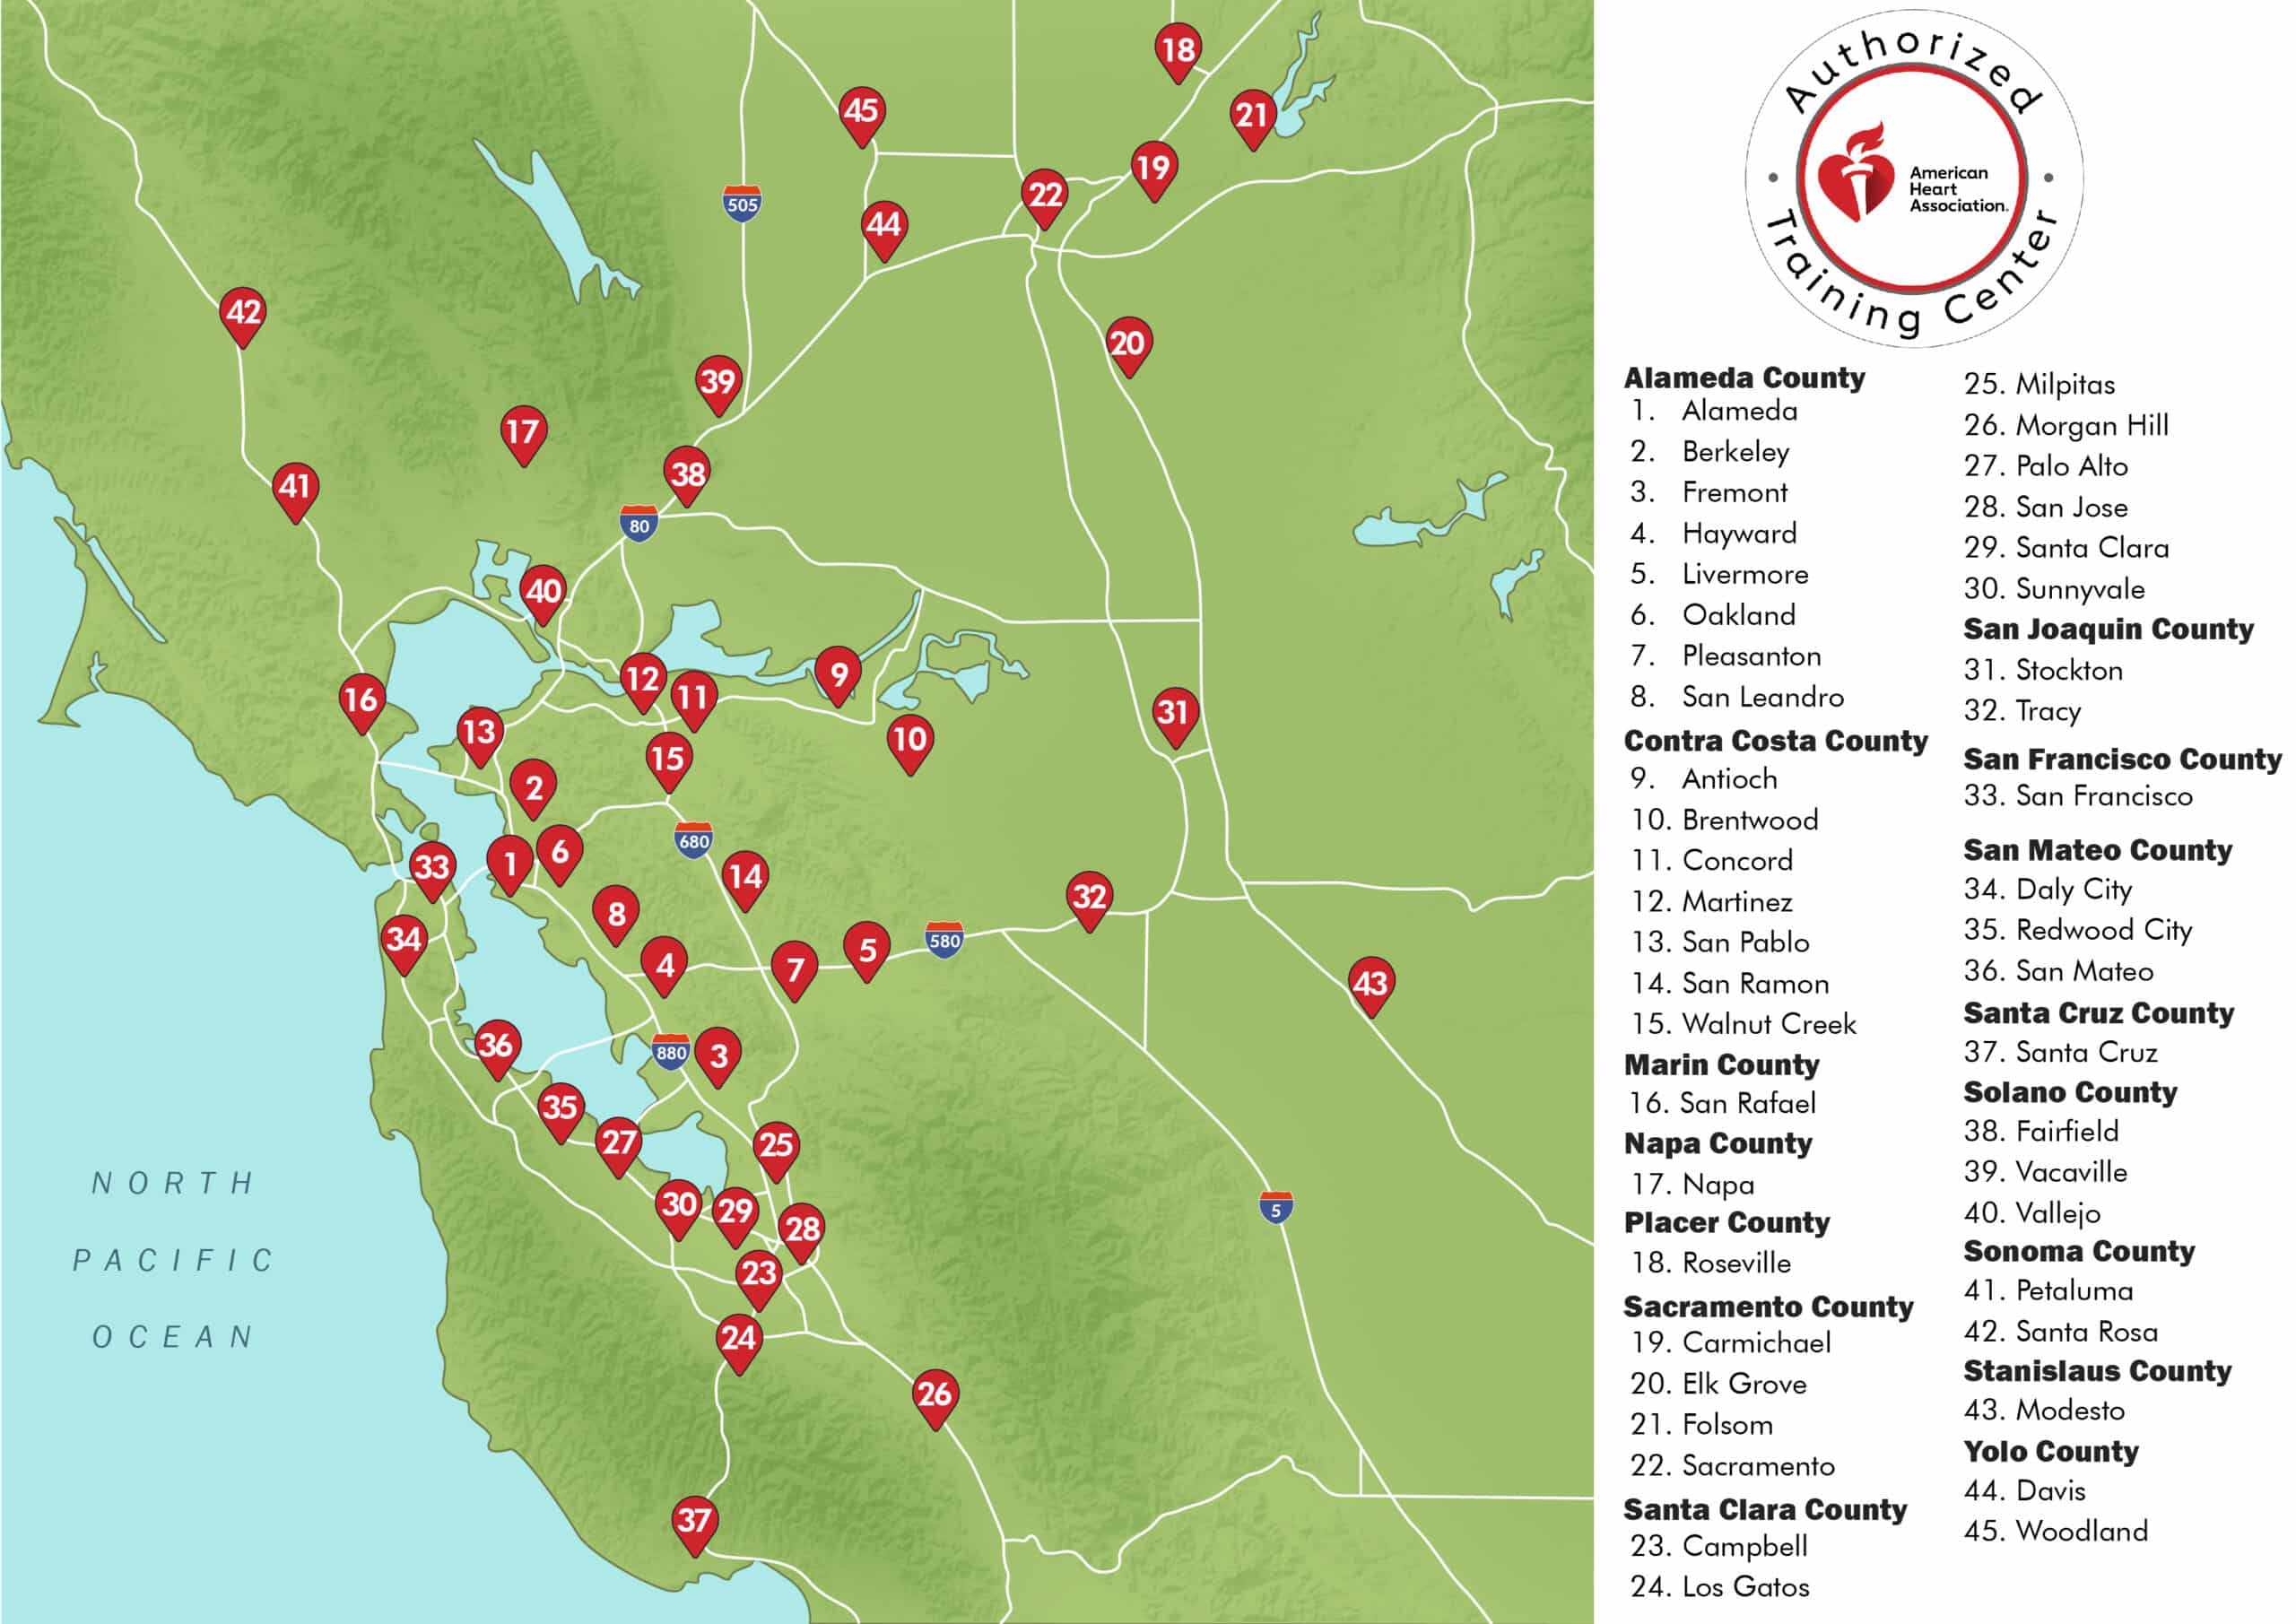 CPR Classes Near Me in Redwood City, CA